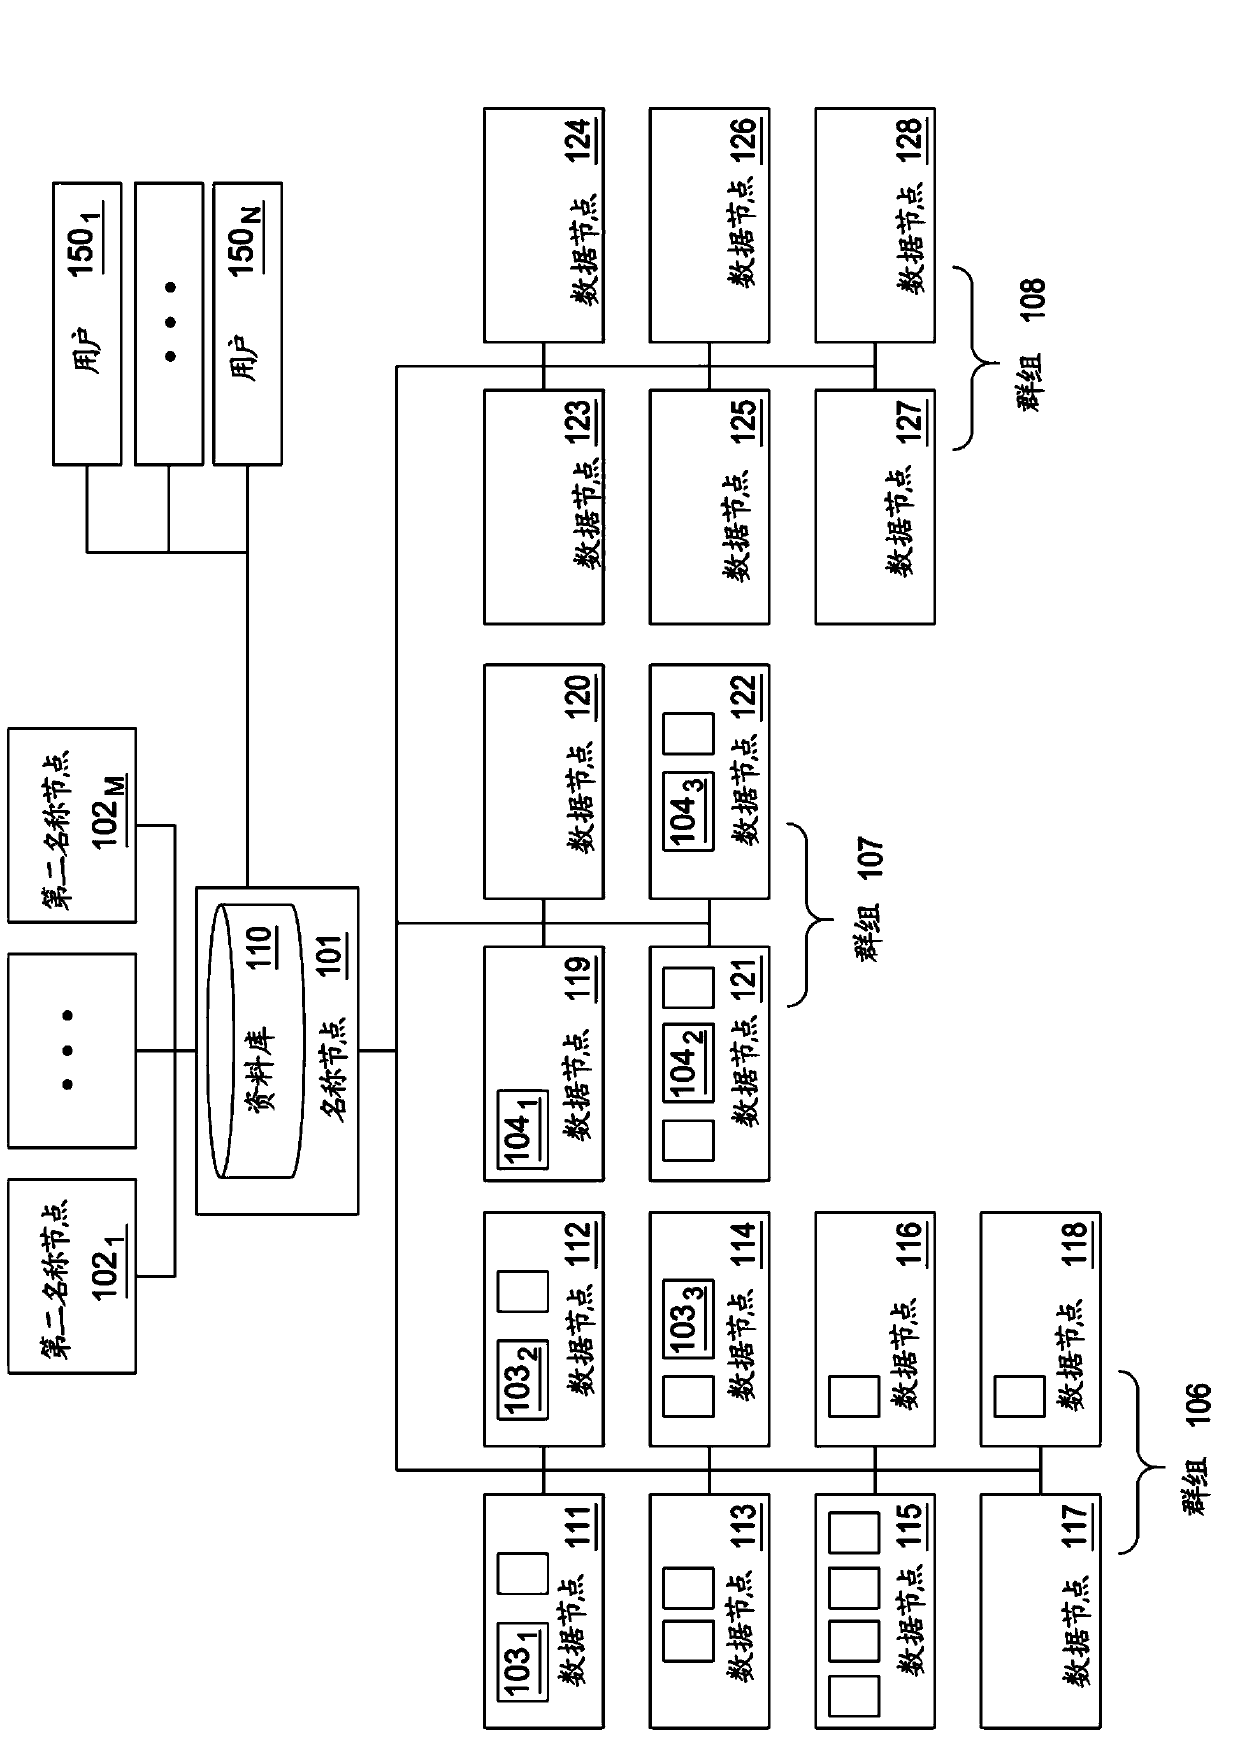 Method and system to select data nodes configured to satisfy a set of requirements